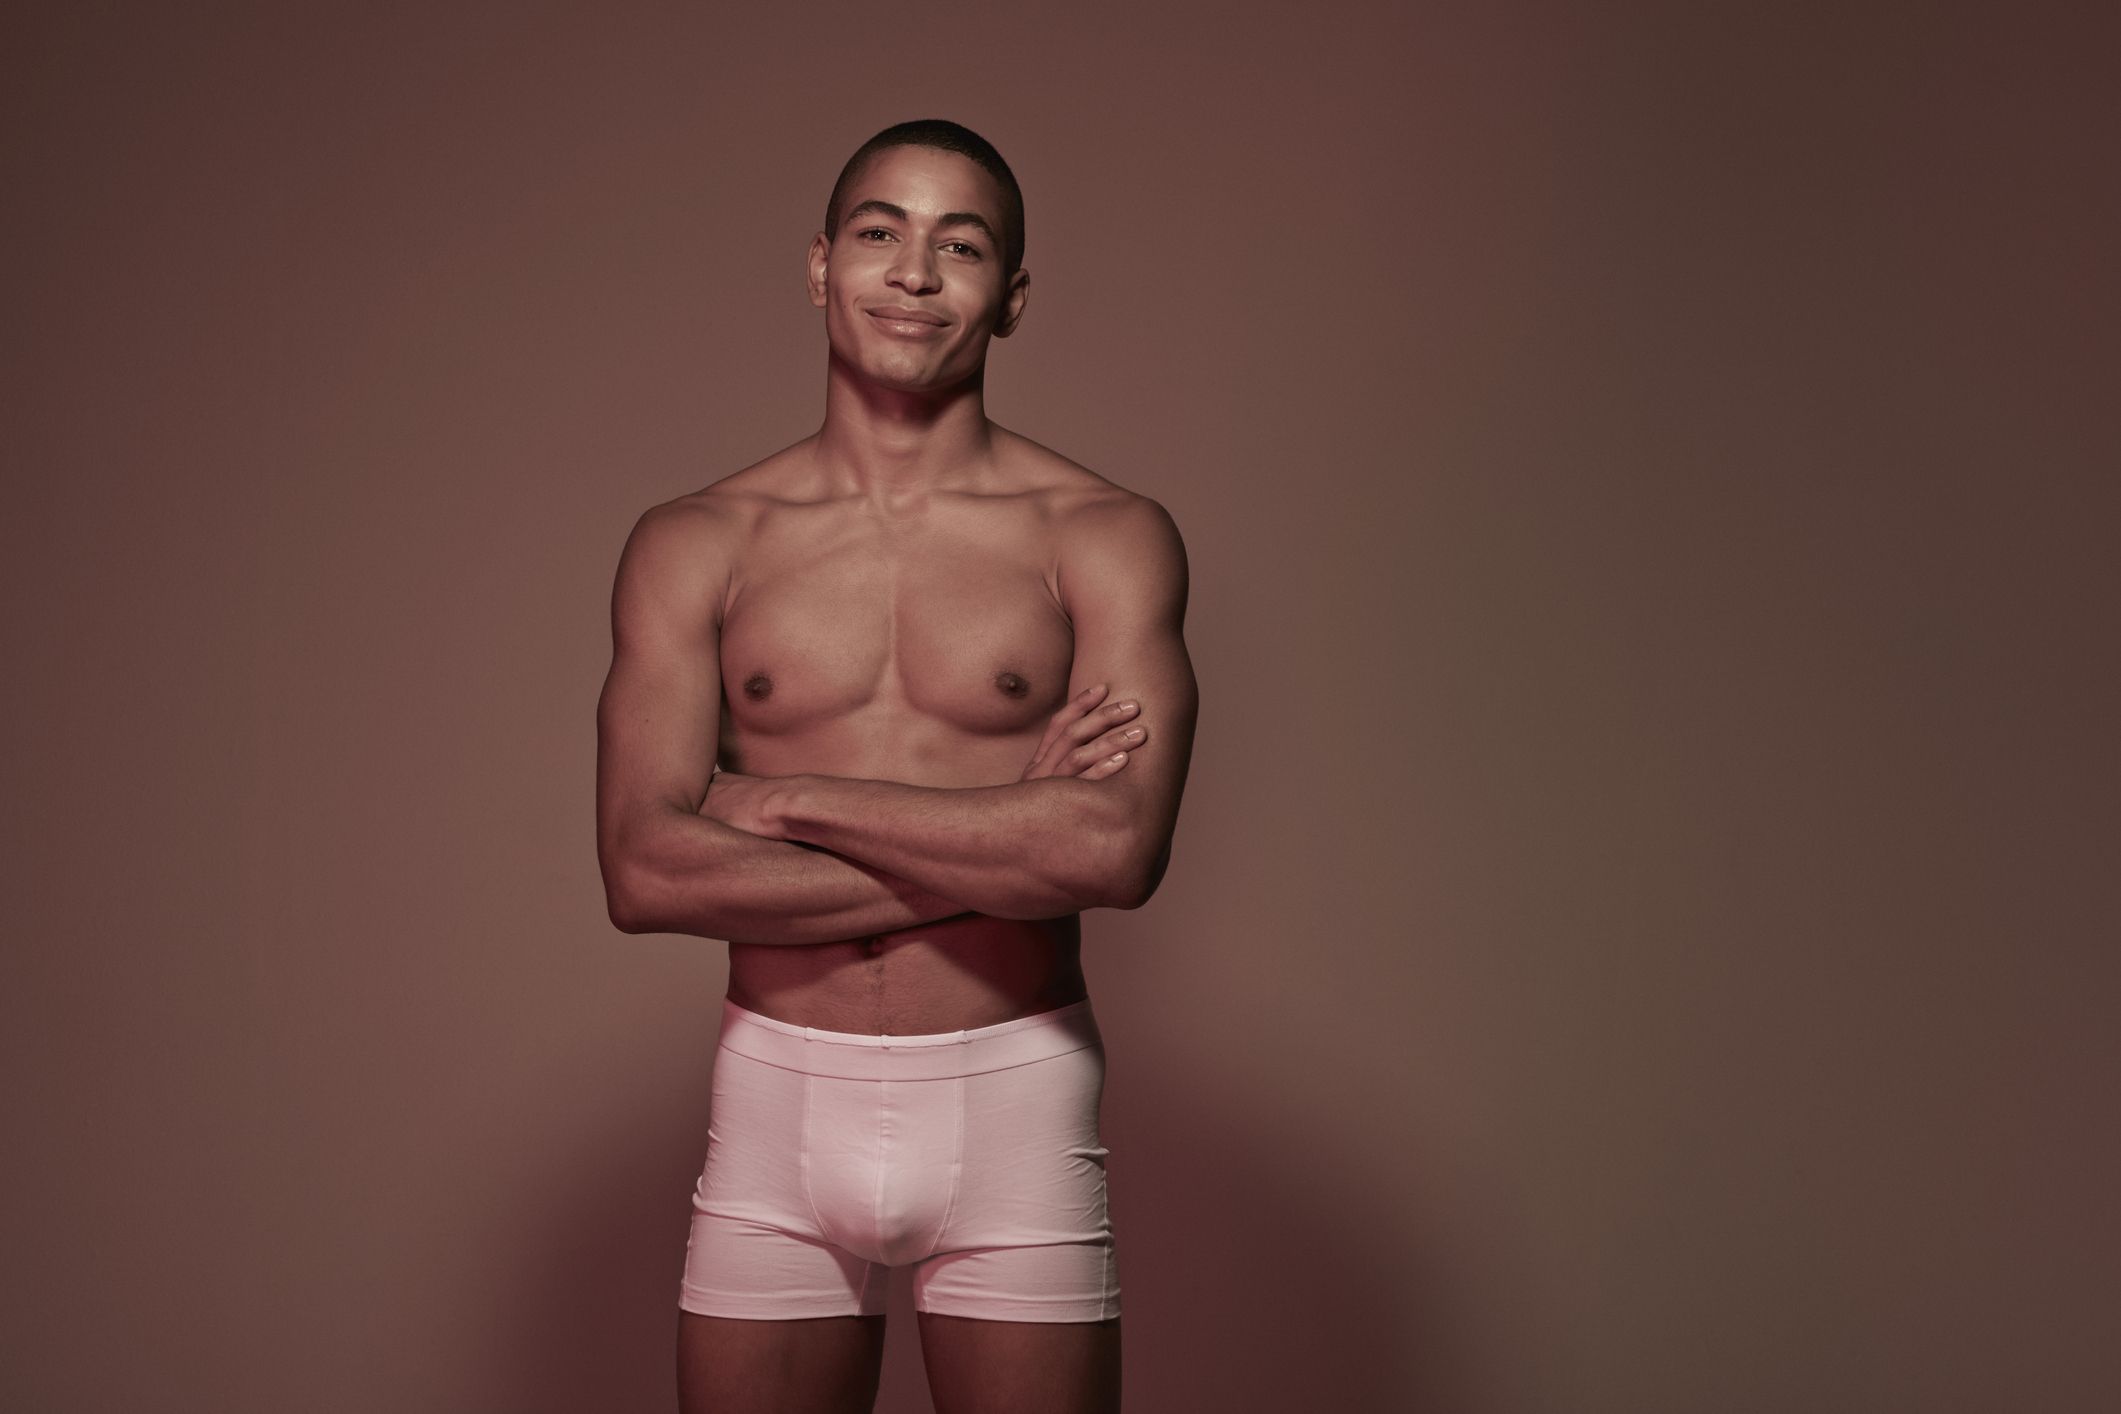 What underpants would make me feel like I was naked under my jeans, briefs,  or boxer shorts? - Quora